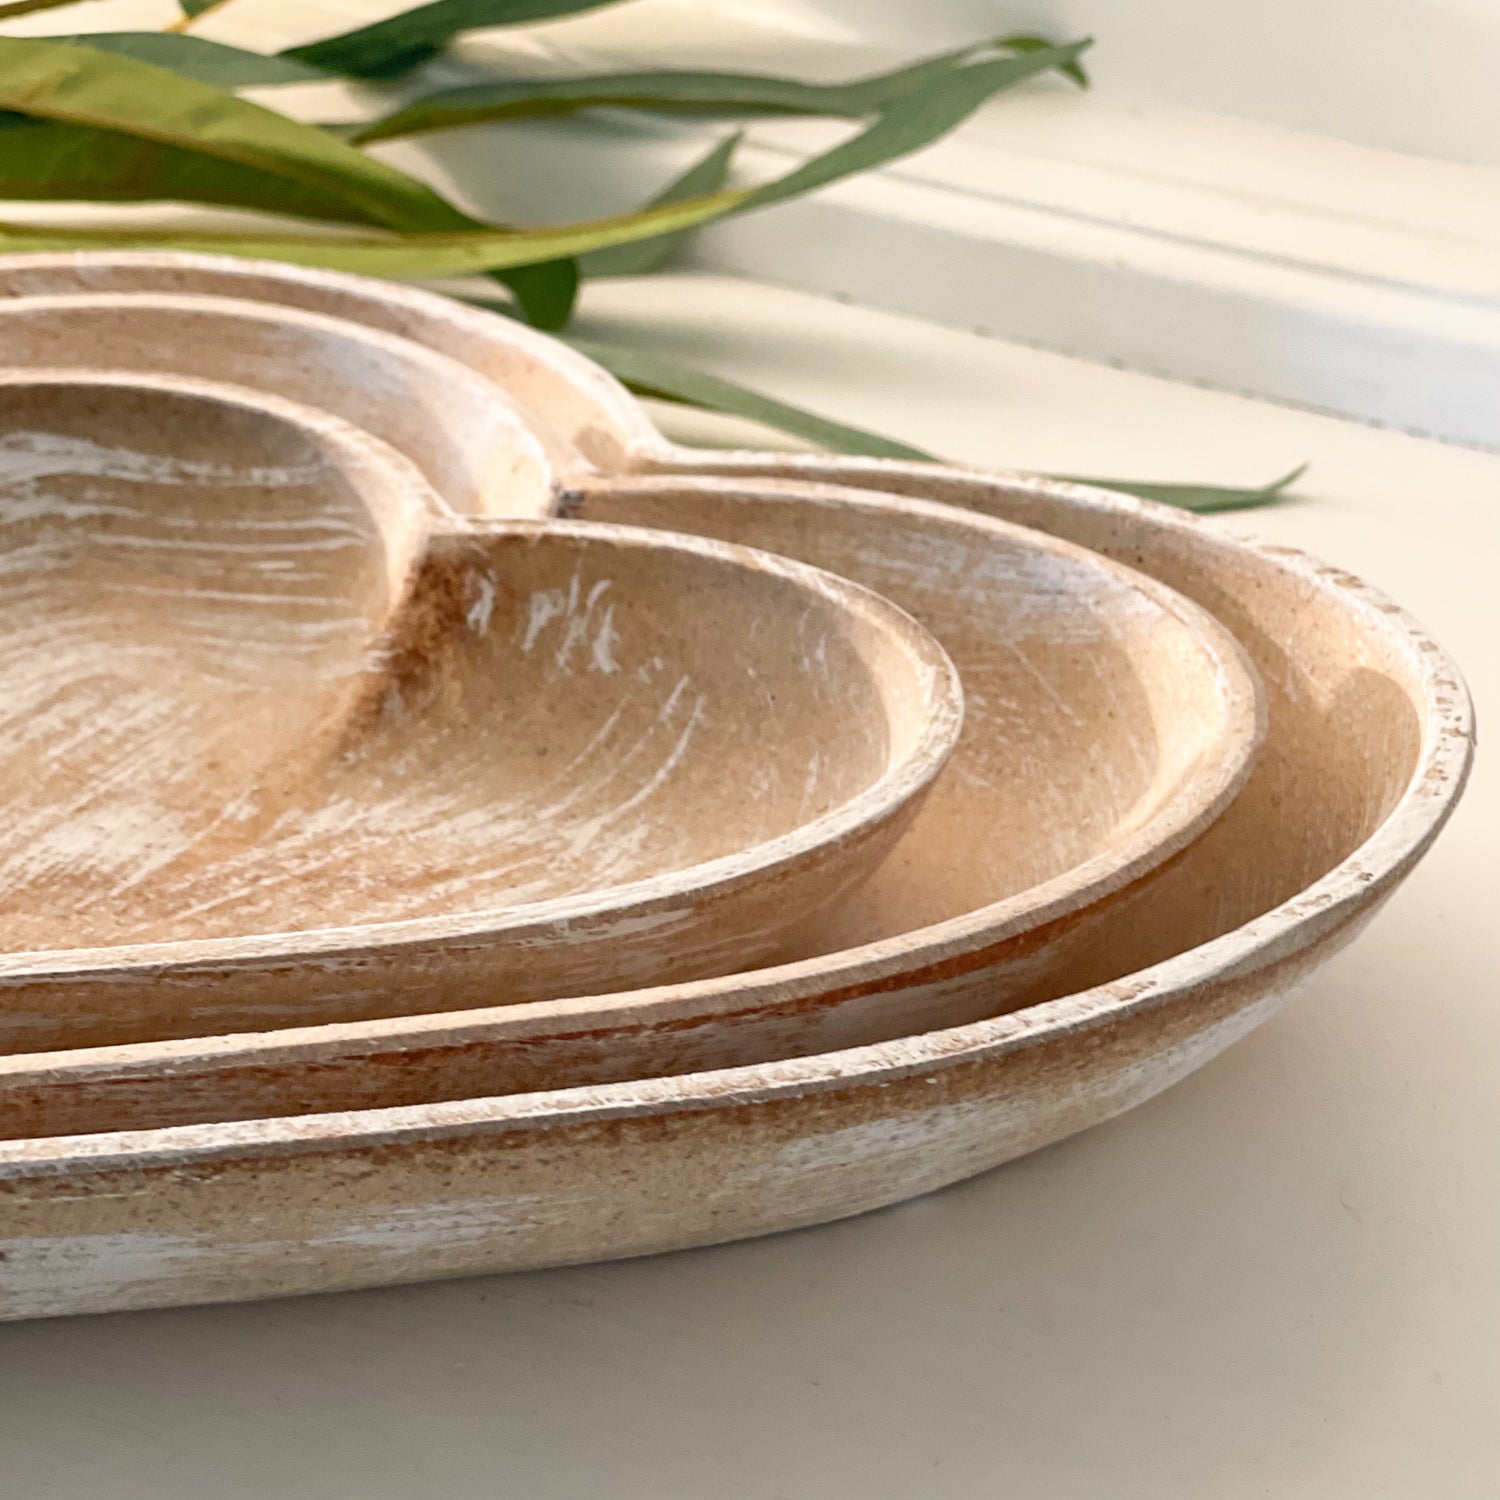 Home at no.7 rustic wooden heart shaped dishes close up